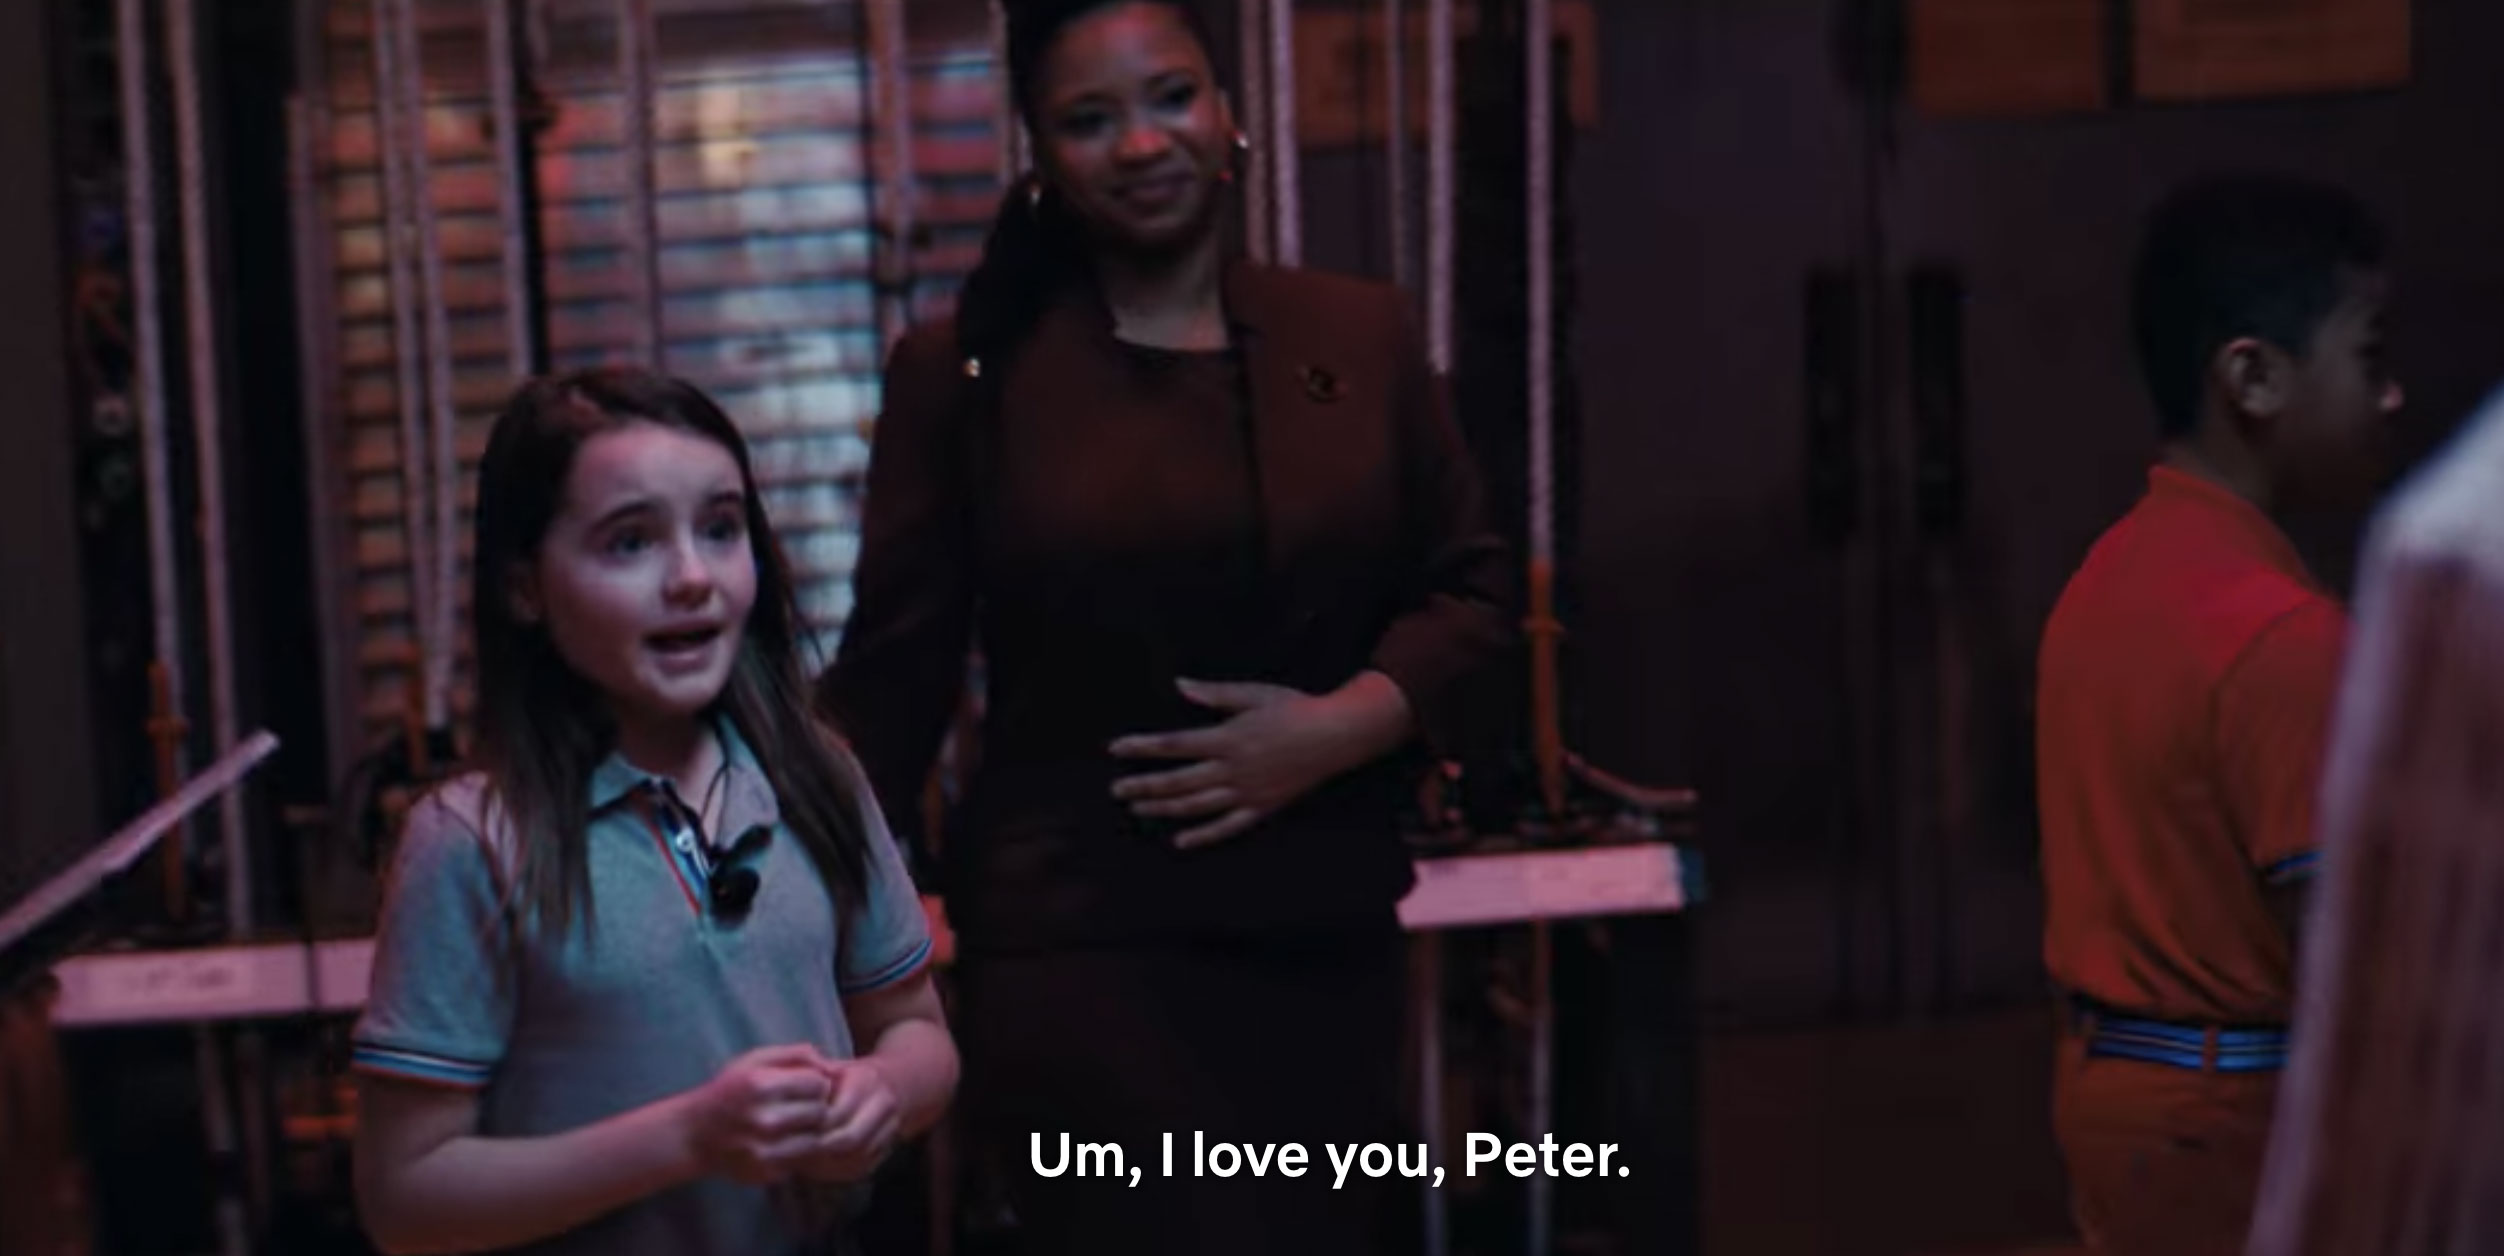 Little girl says "I love you, Peter" to Isherwell in Don't Look Up